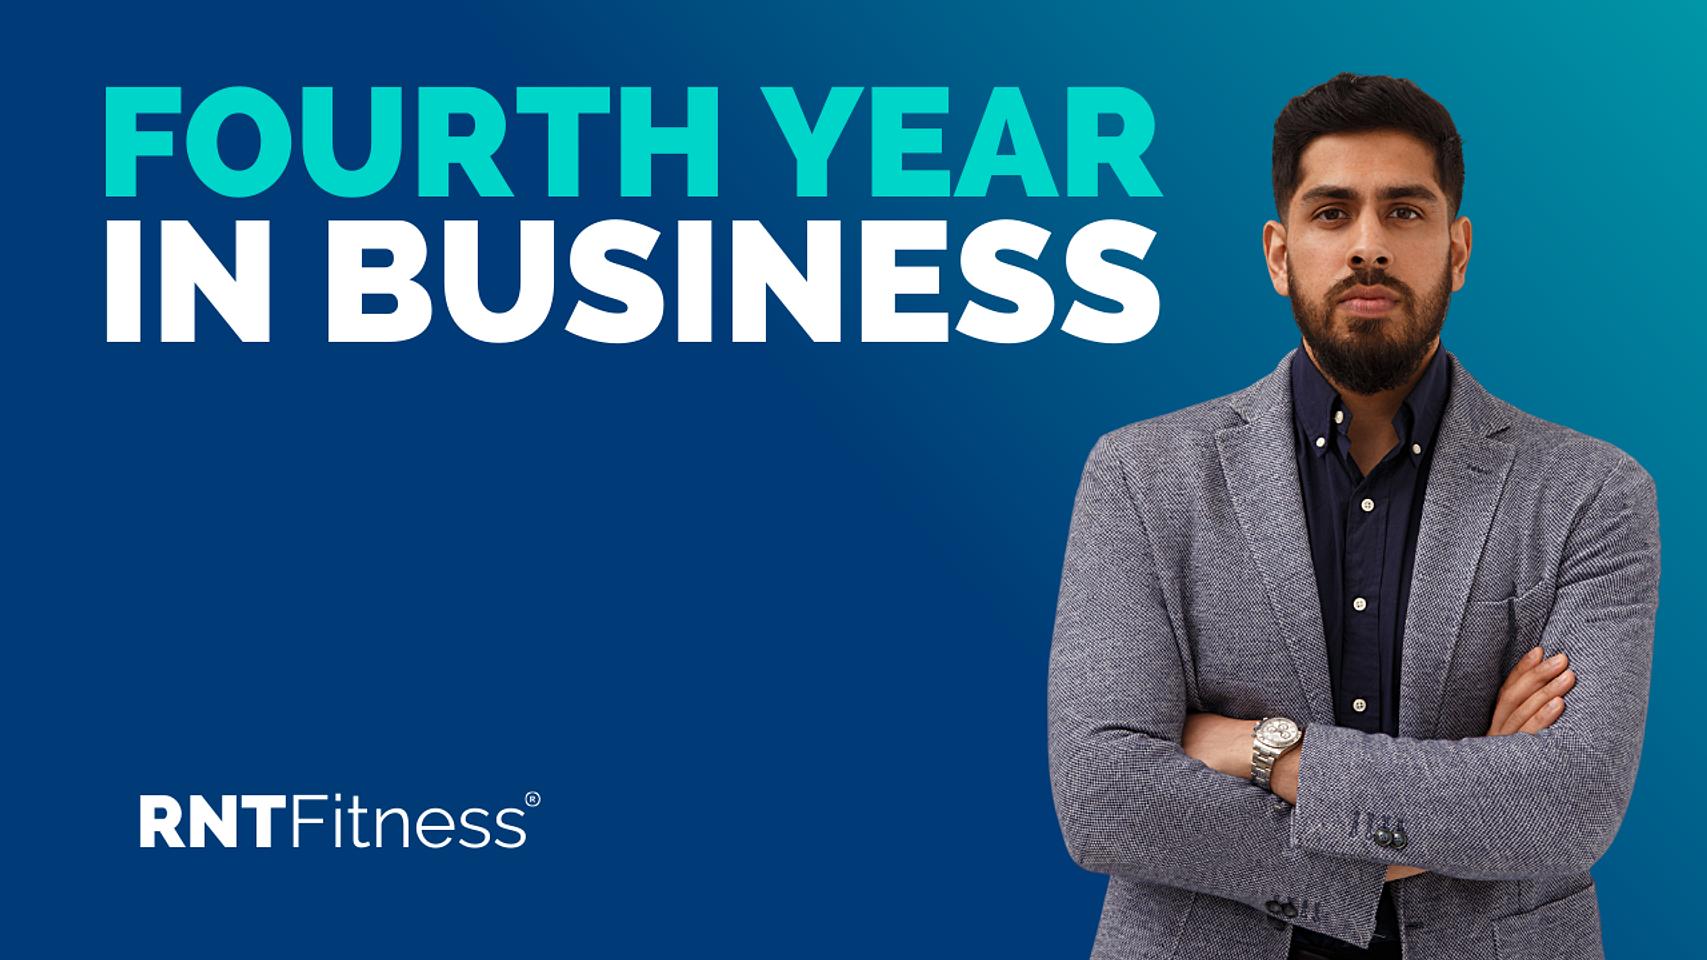 The Fourth Year In Business